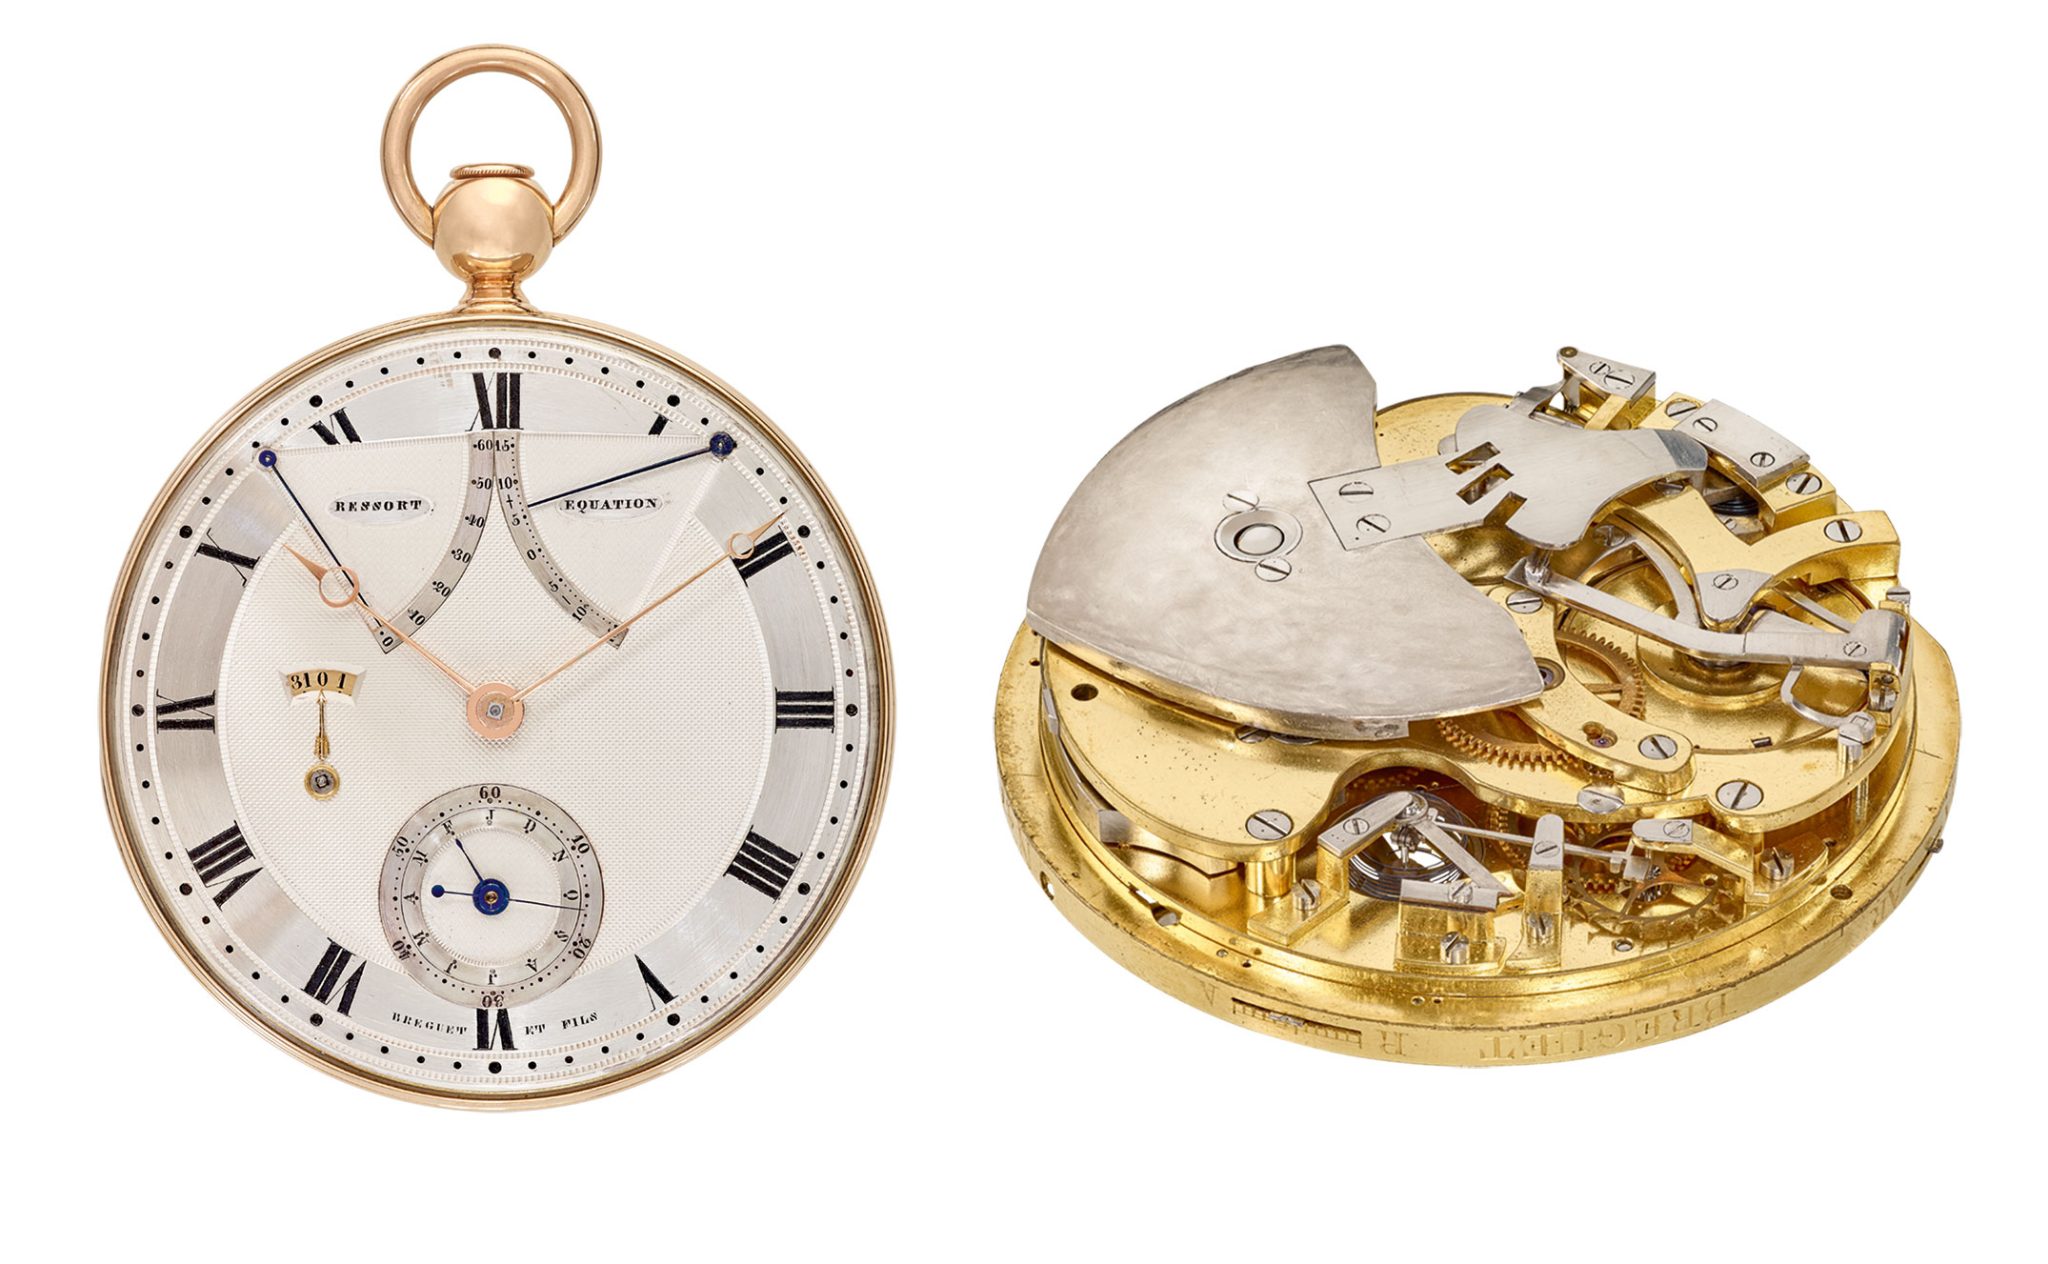 Breguet-Pocket-Watch-with-Calendar-and-Equation-of-Time-and-Selfwinding-1800-No-217